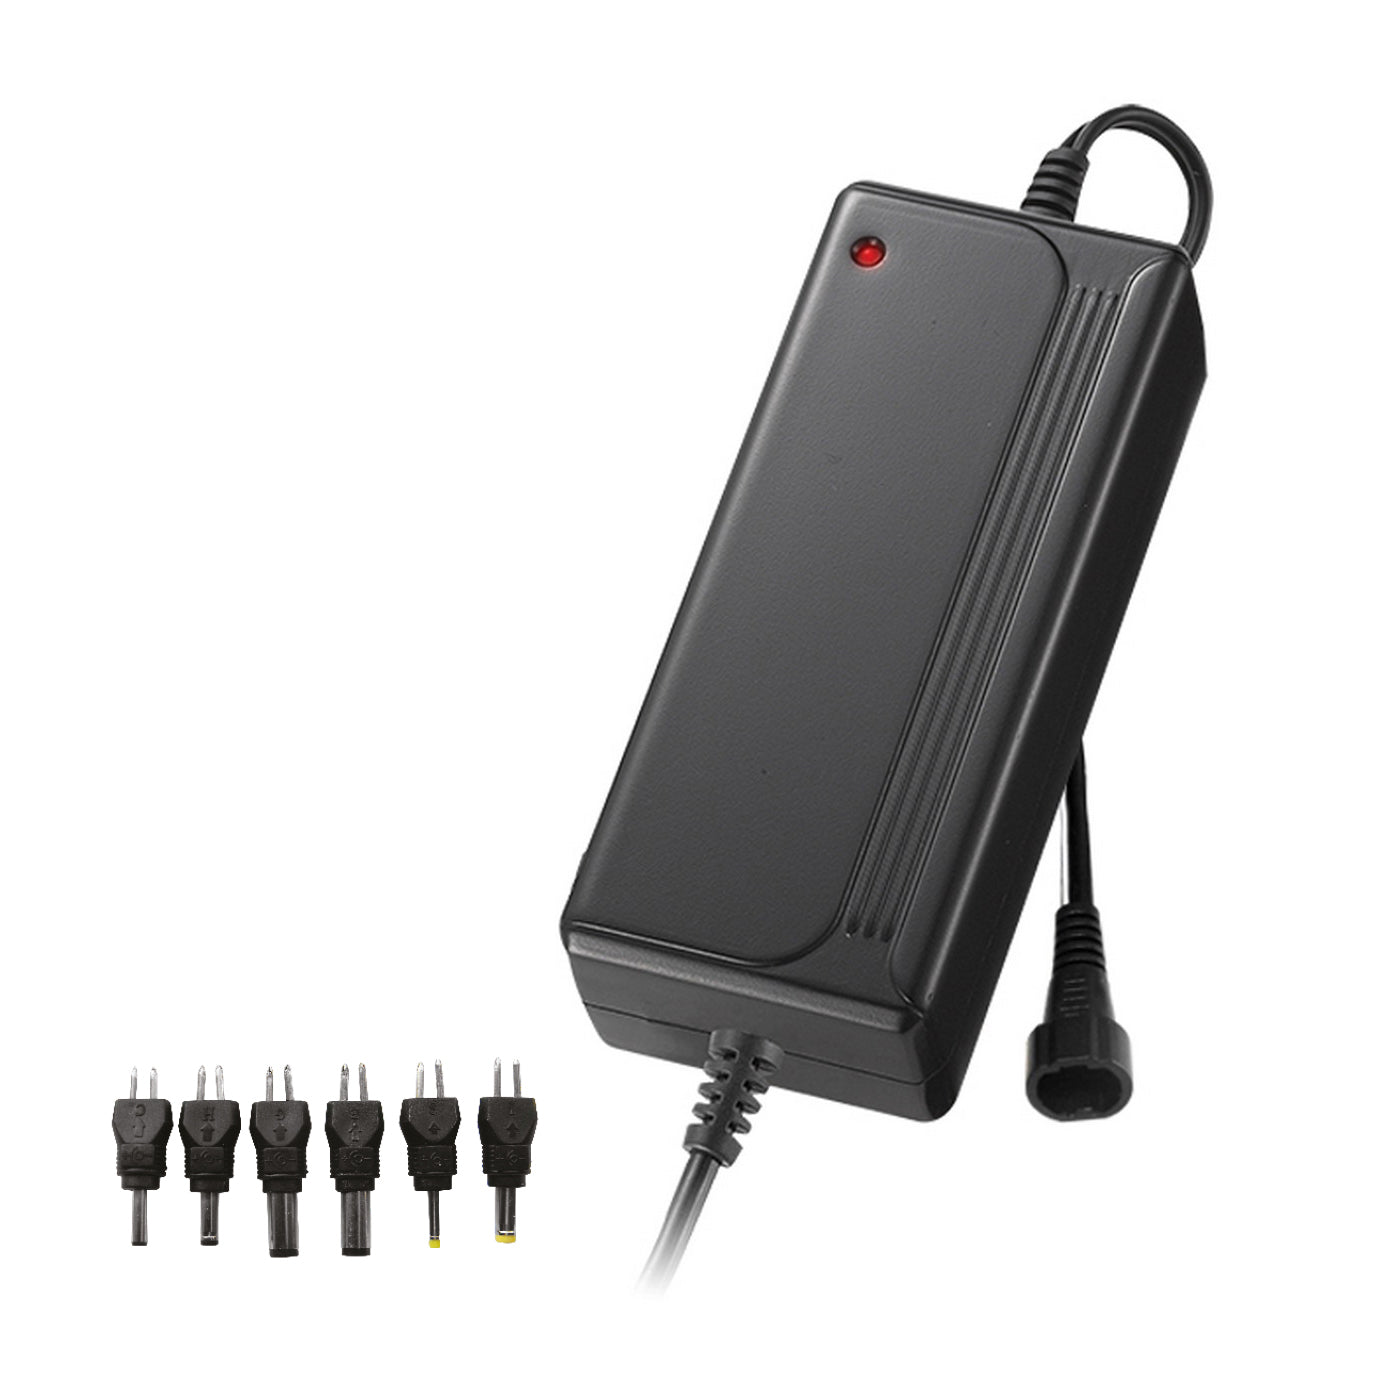 Alcapower Switching Power Supply 5-6-7.5-9-12-13.5-15Vcc 3A max, universal charger, charger with 6 adapters